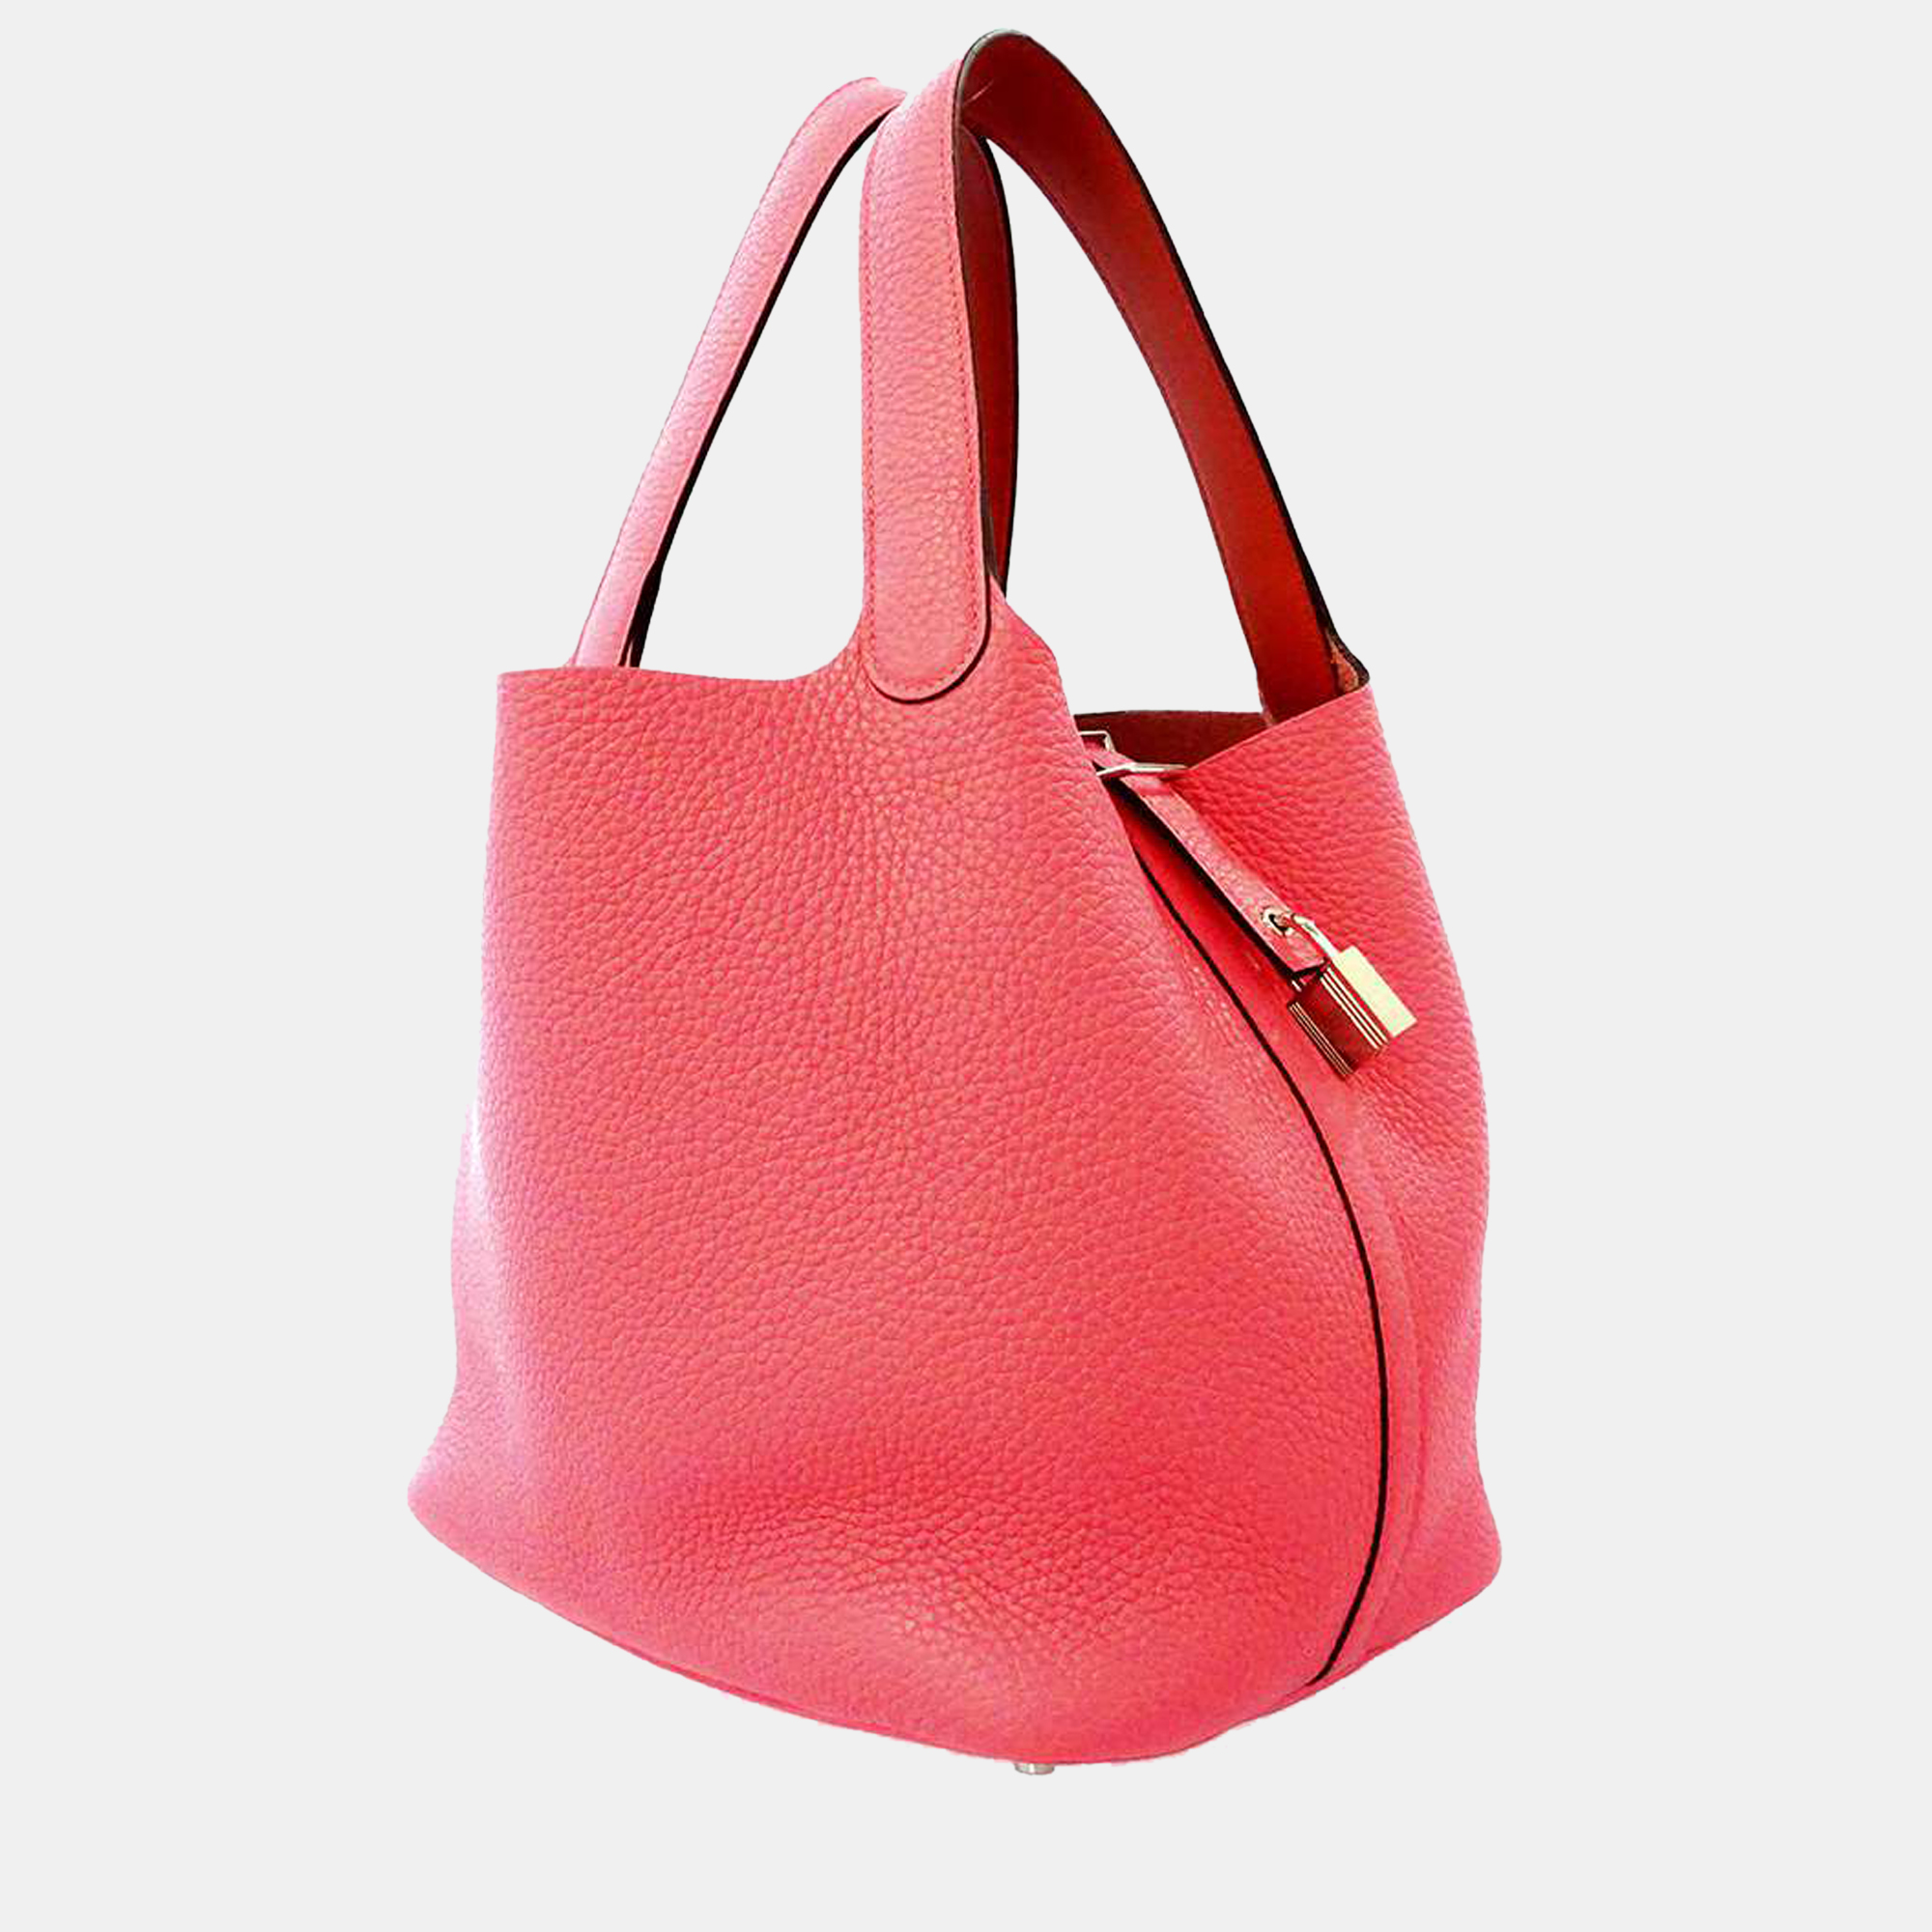 

Hermes Rose Azalee Taurillon Clemence and Swift Leather Eclat MM Picotin Lock Tote Bag, Pink